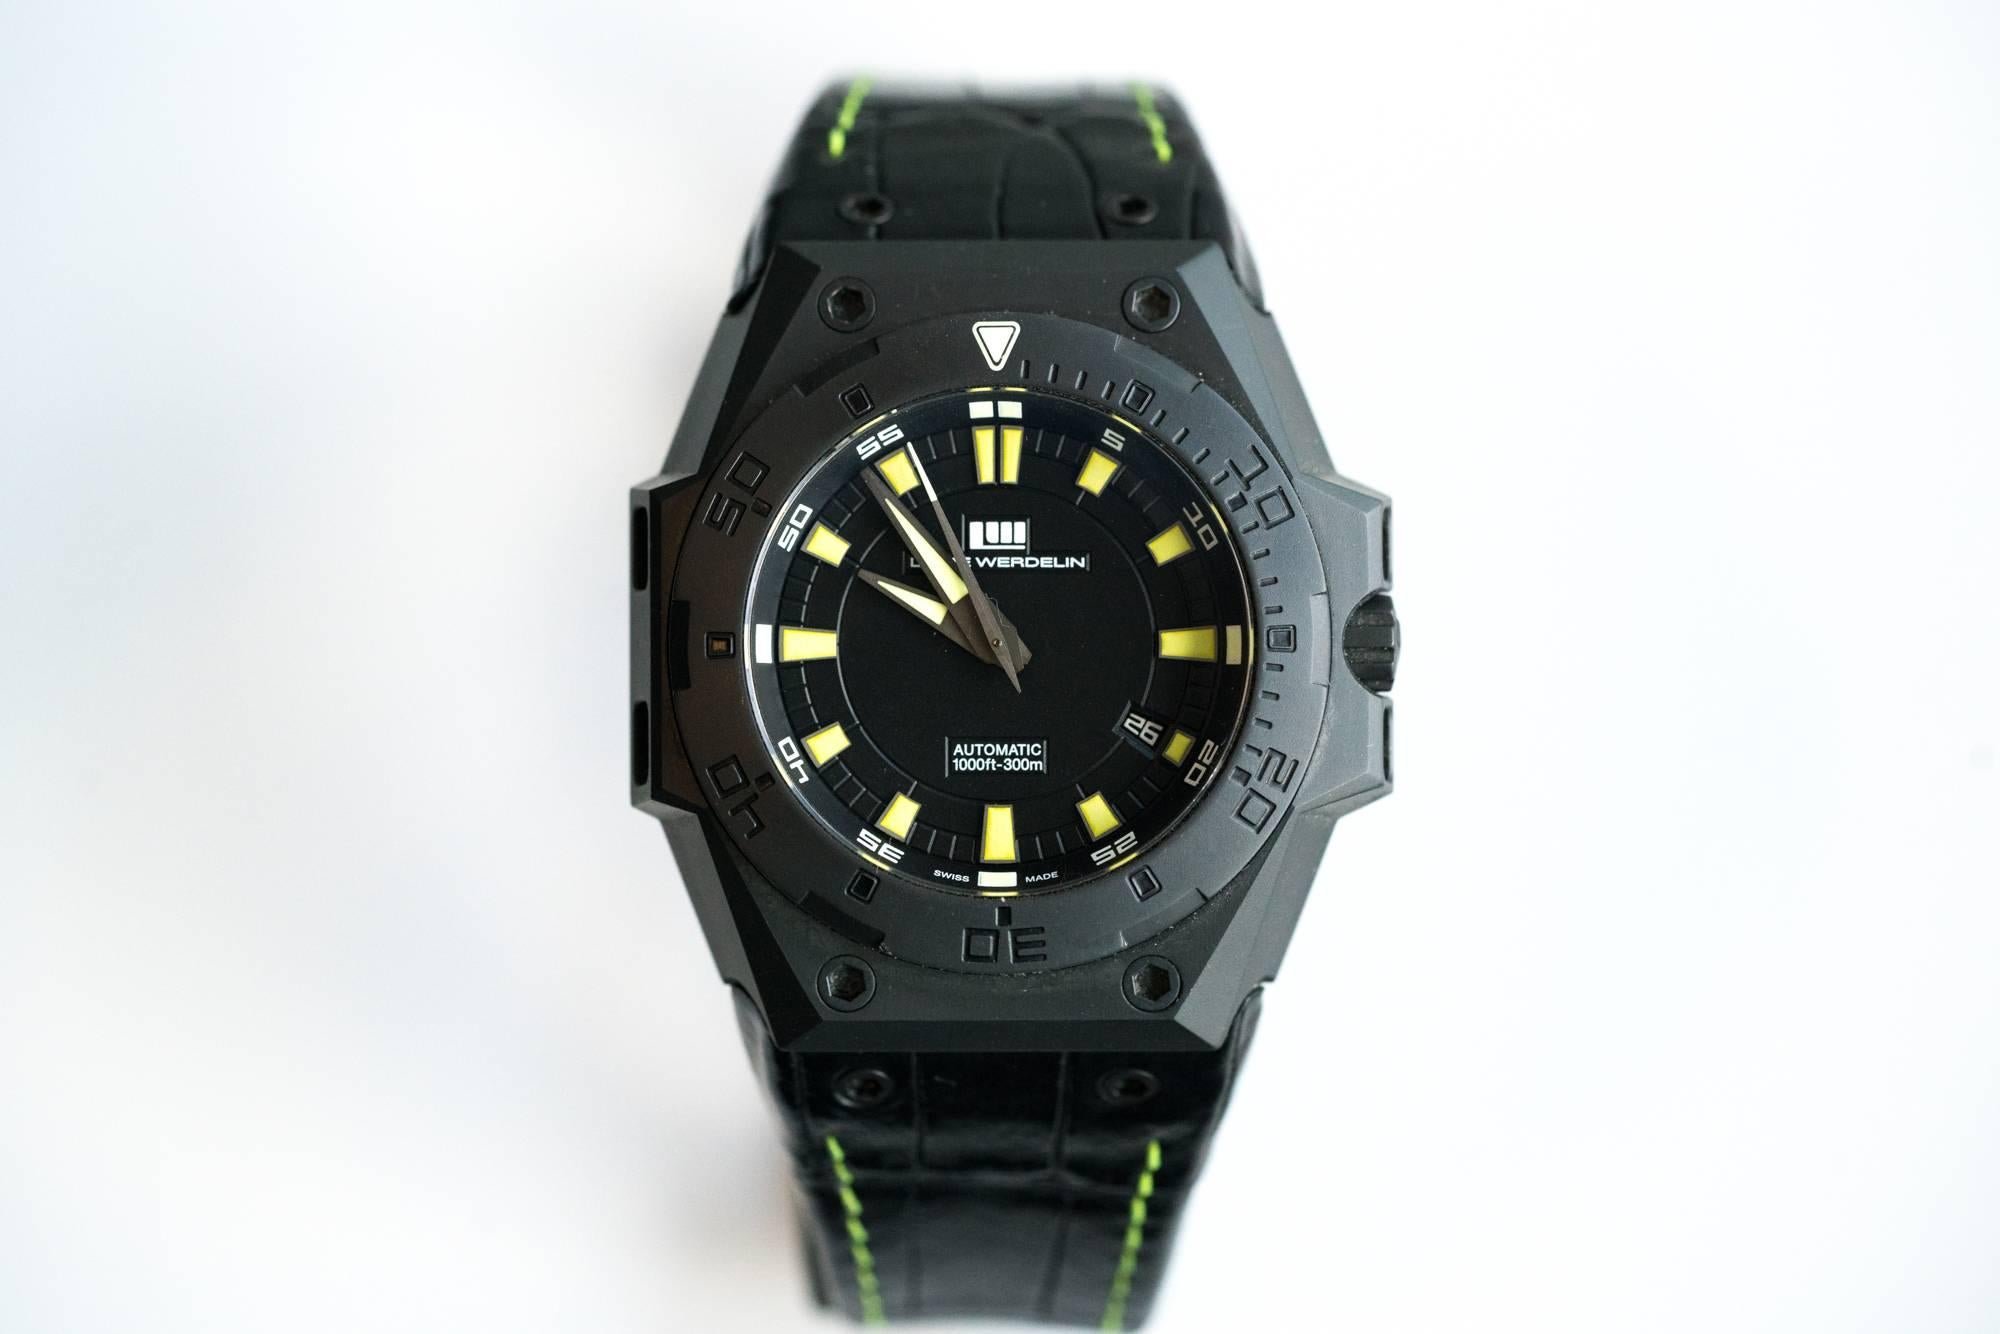 Swiss made Linde Werdelin diver watch, Limited Edition number 77 of 88 made. The band shows as new with little to no wear. The clasp and case shows some minor wear but it is DLC coated so expect minimal wear and tear. The crystal is perfect, and the